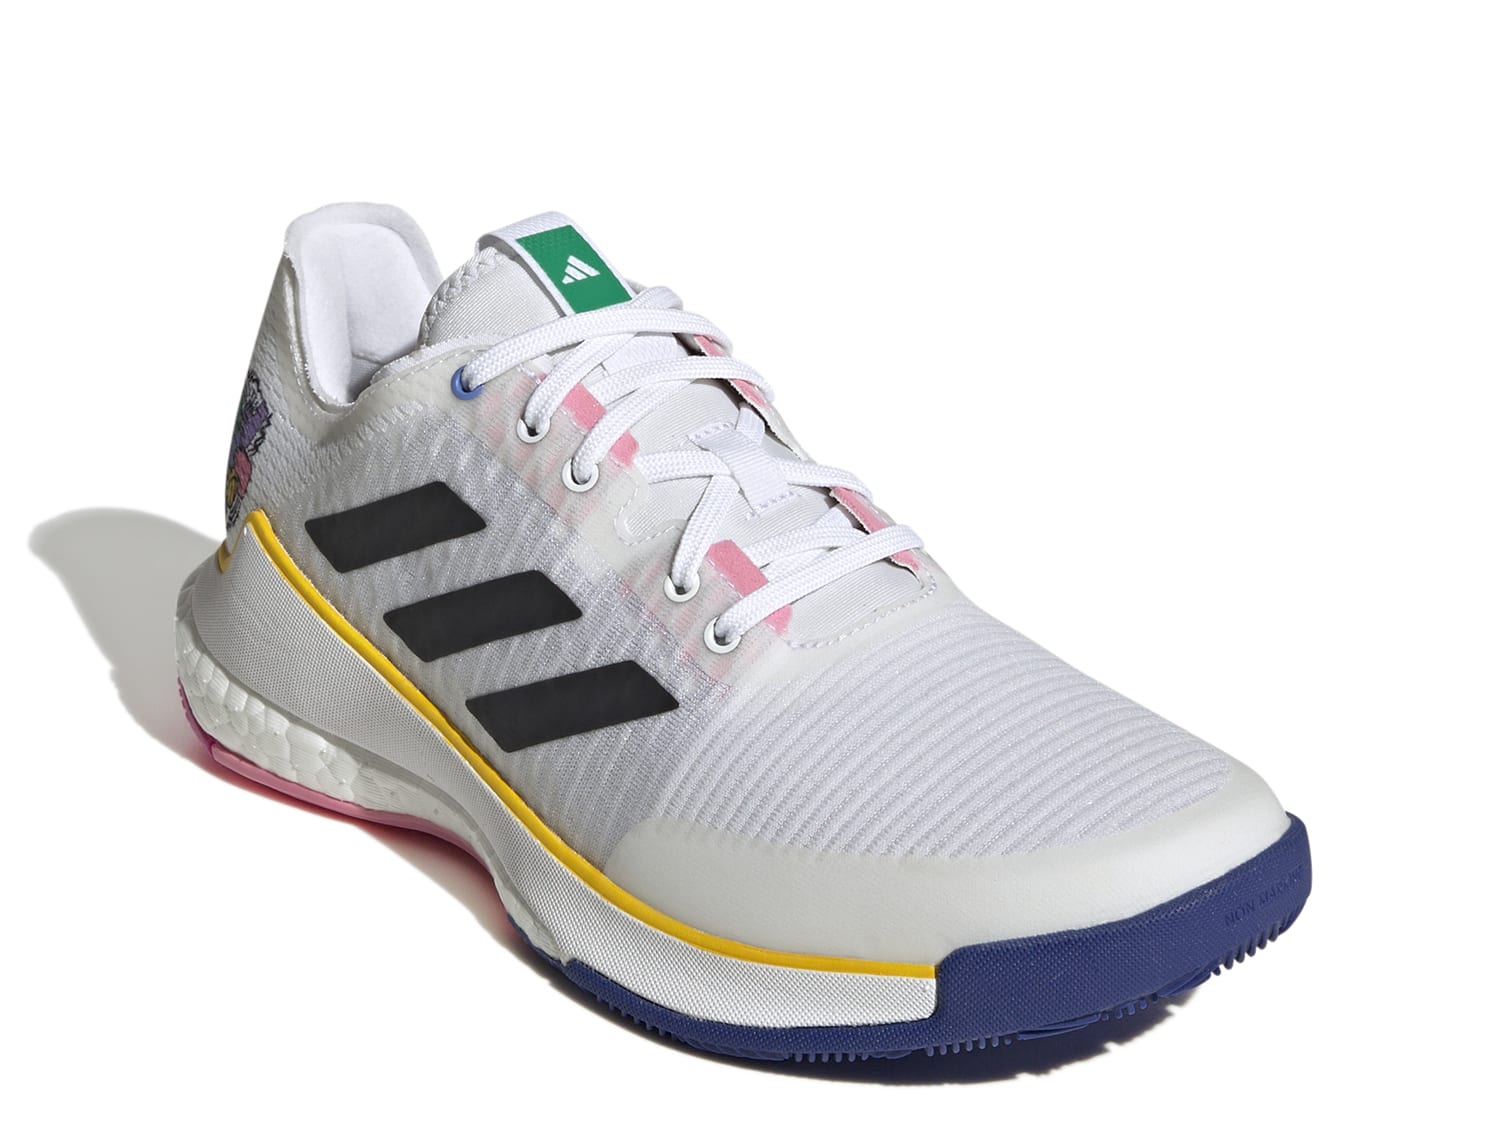 ubemandede tortur Investere adidas Crazyflight Volleyball Shoe - Women's - Free Shipping | DSW